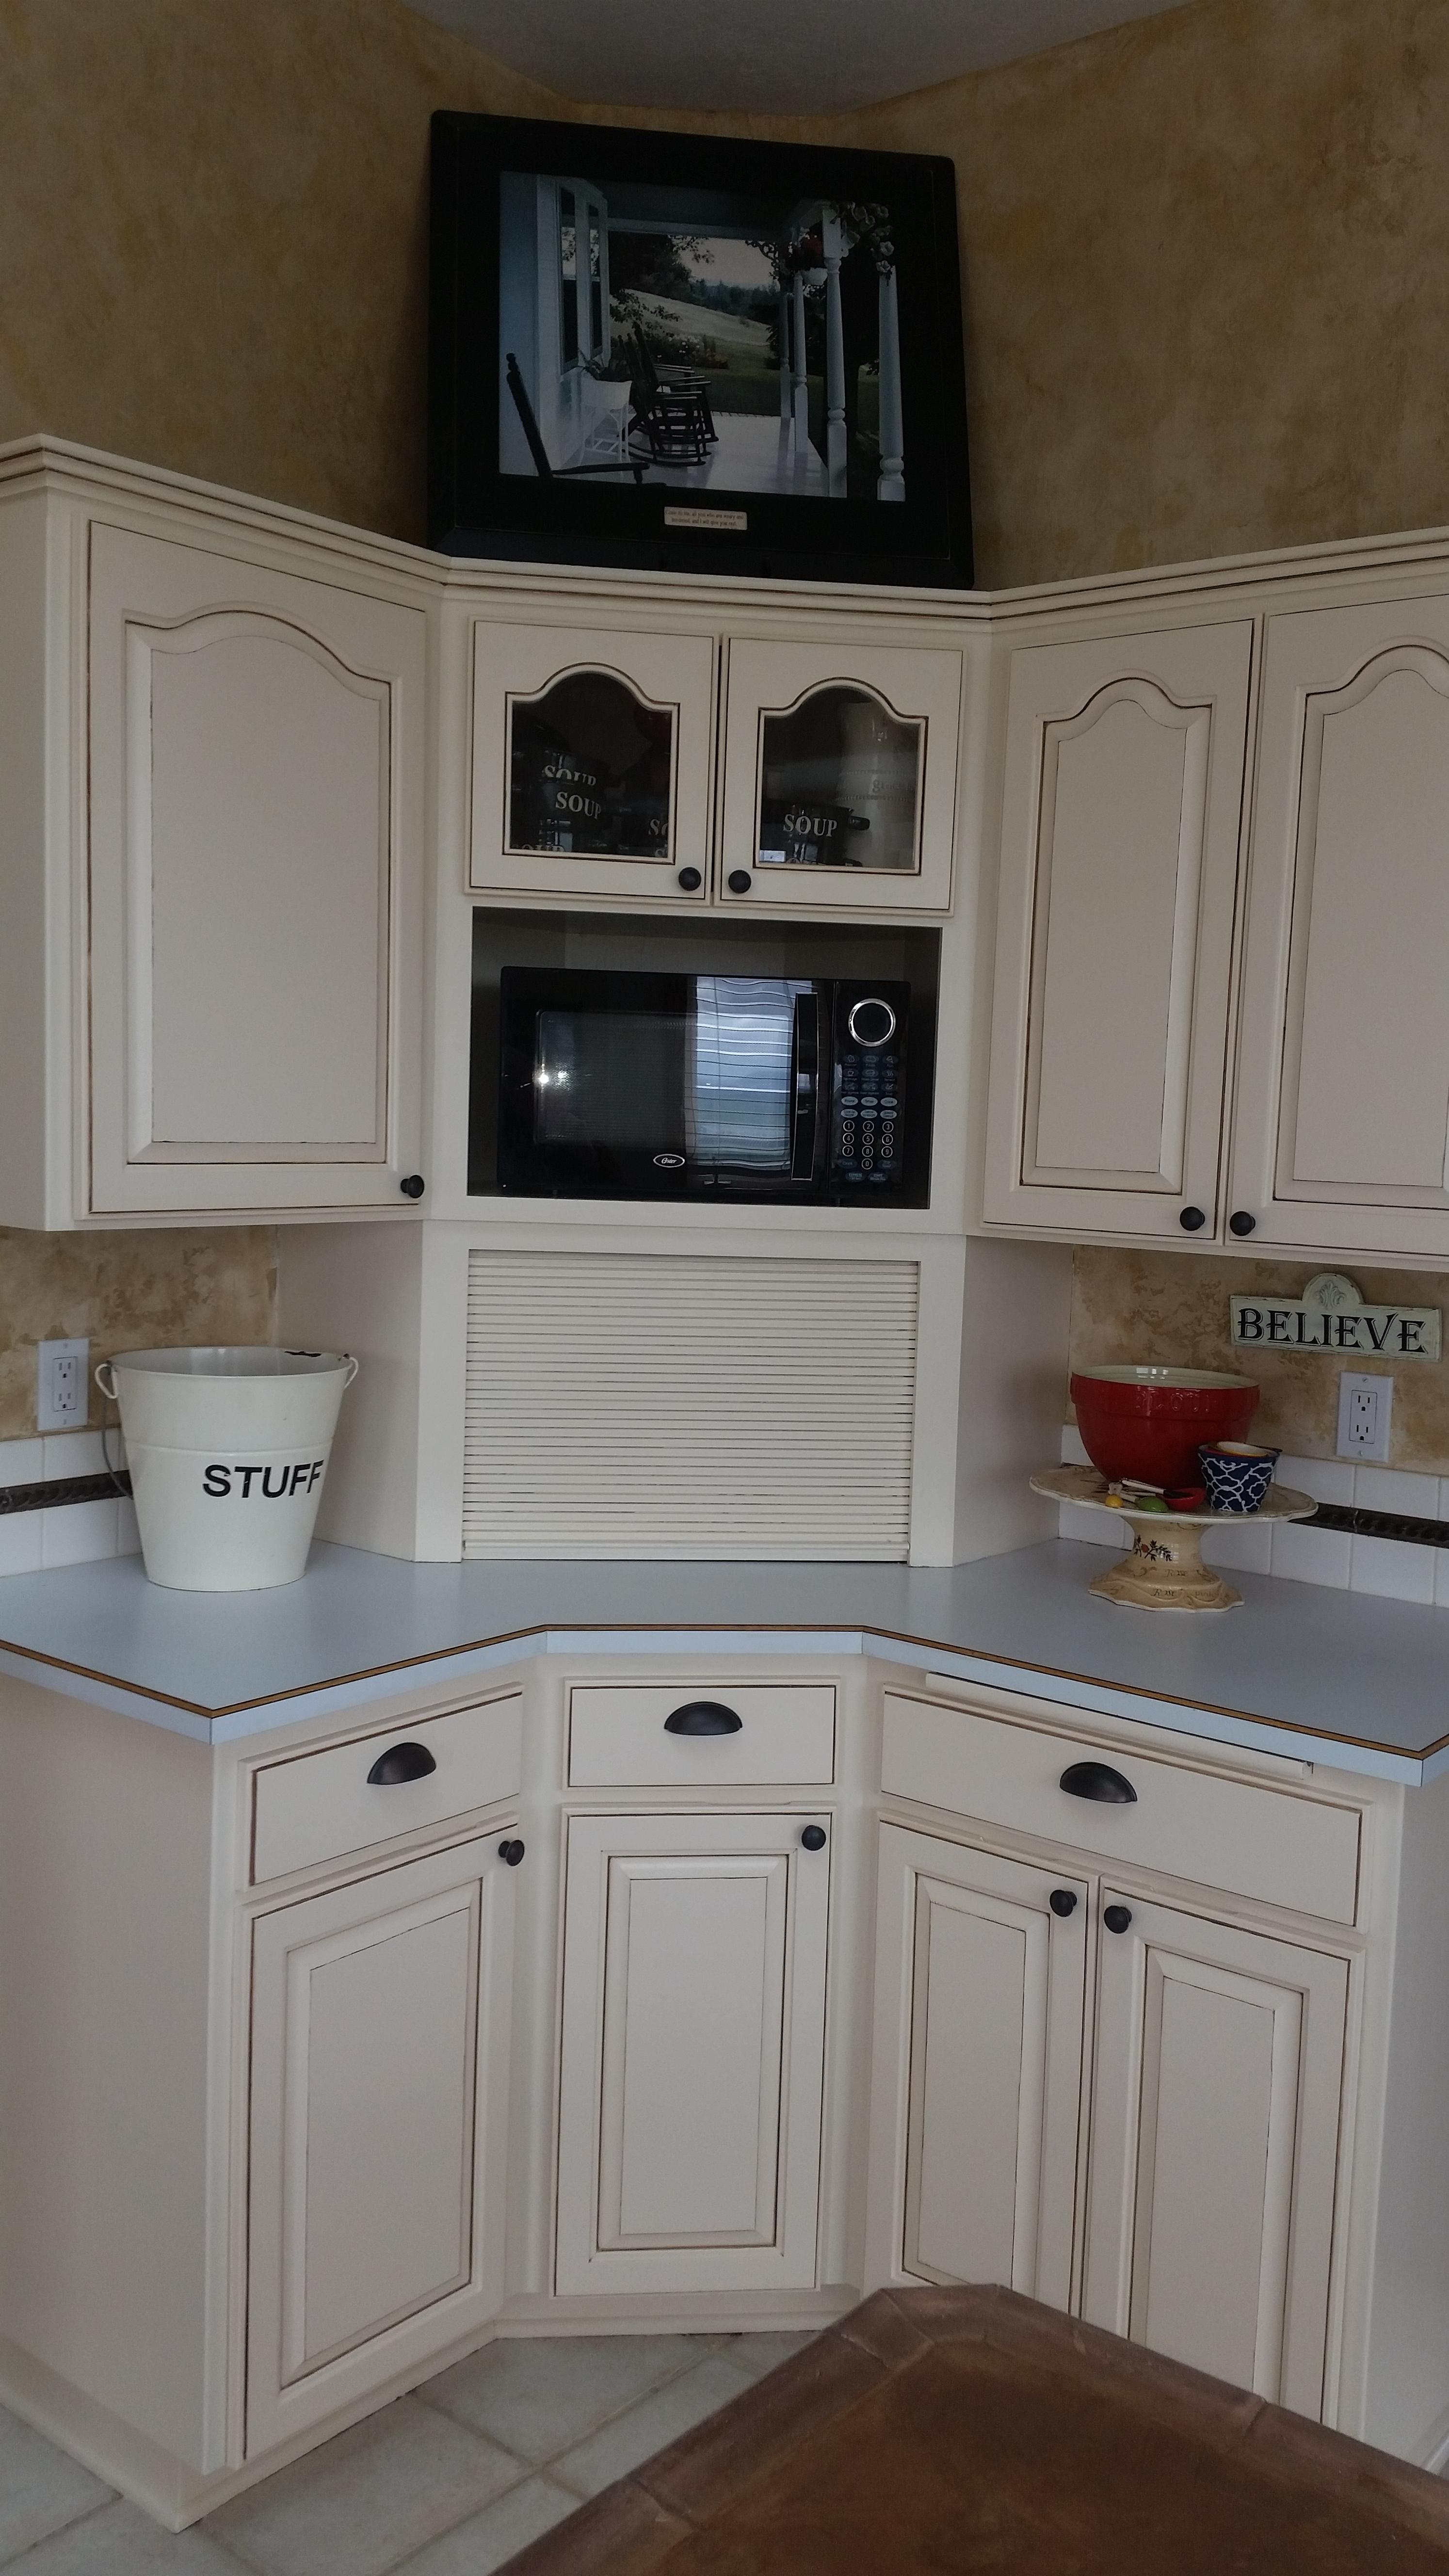 dated orange cabinets , painted and glazed, a whole new look